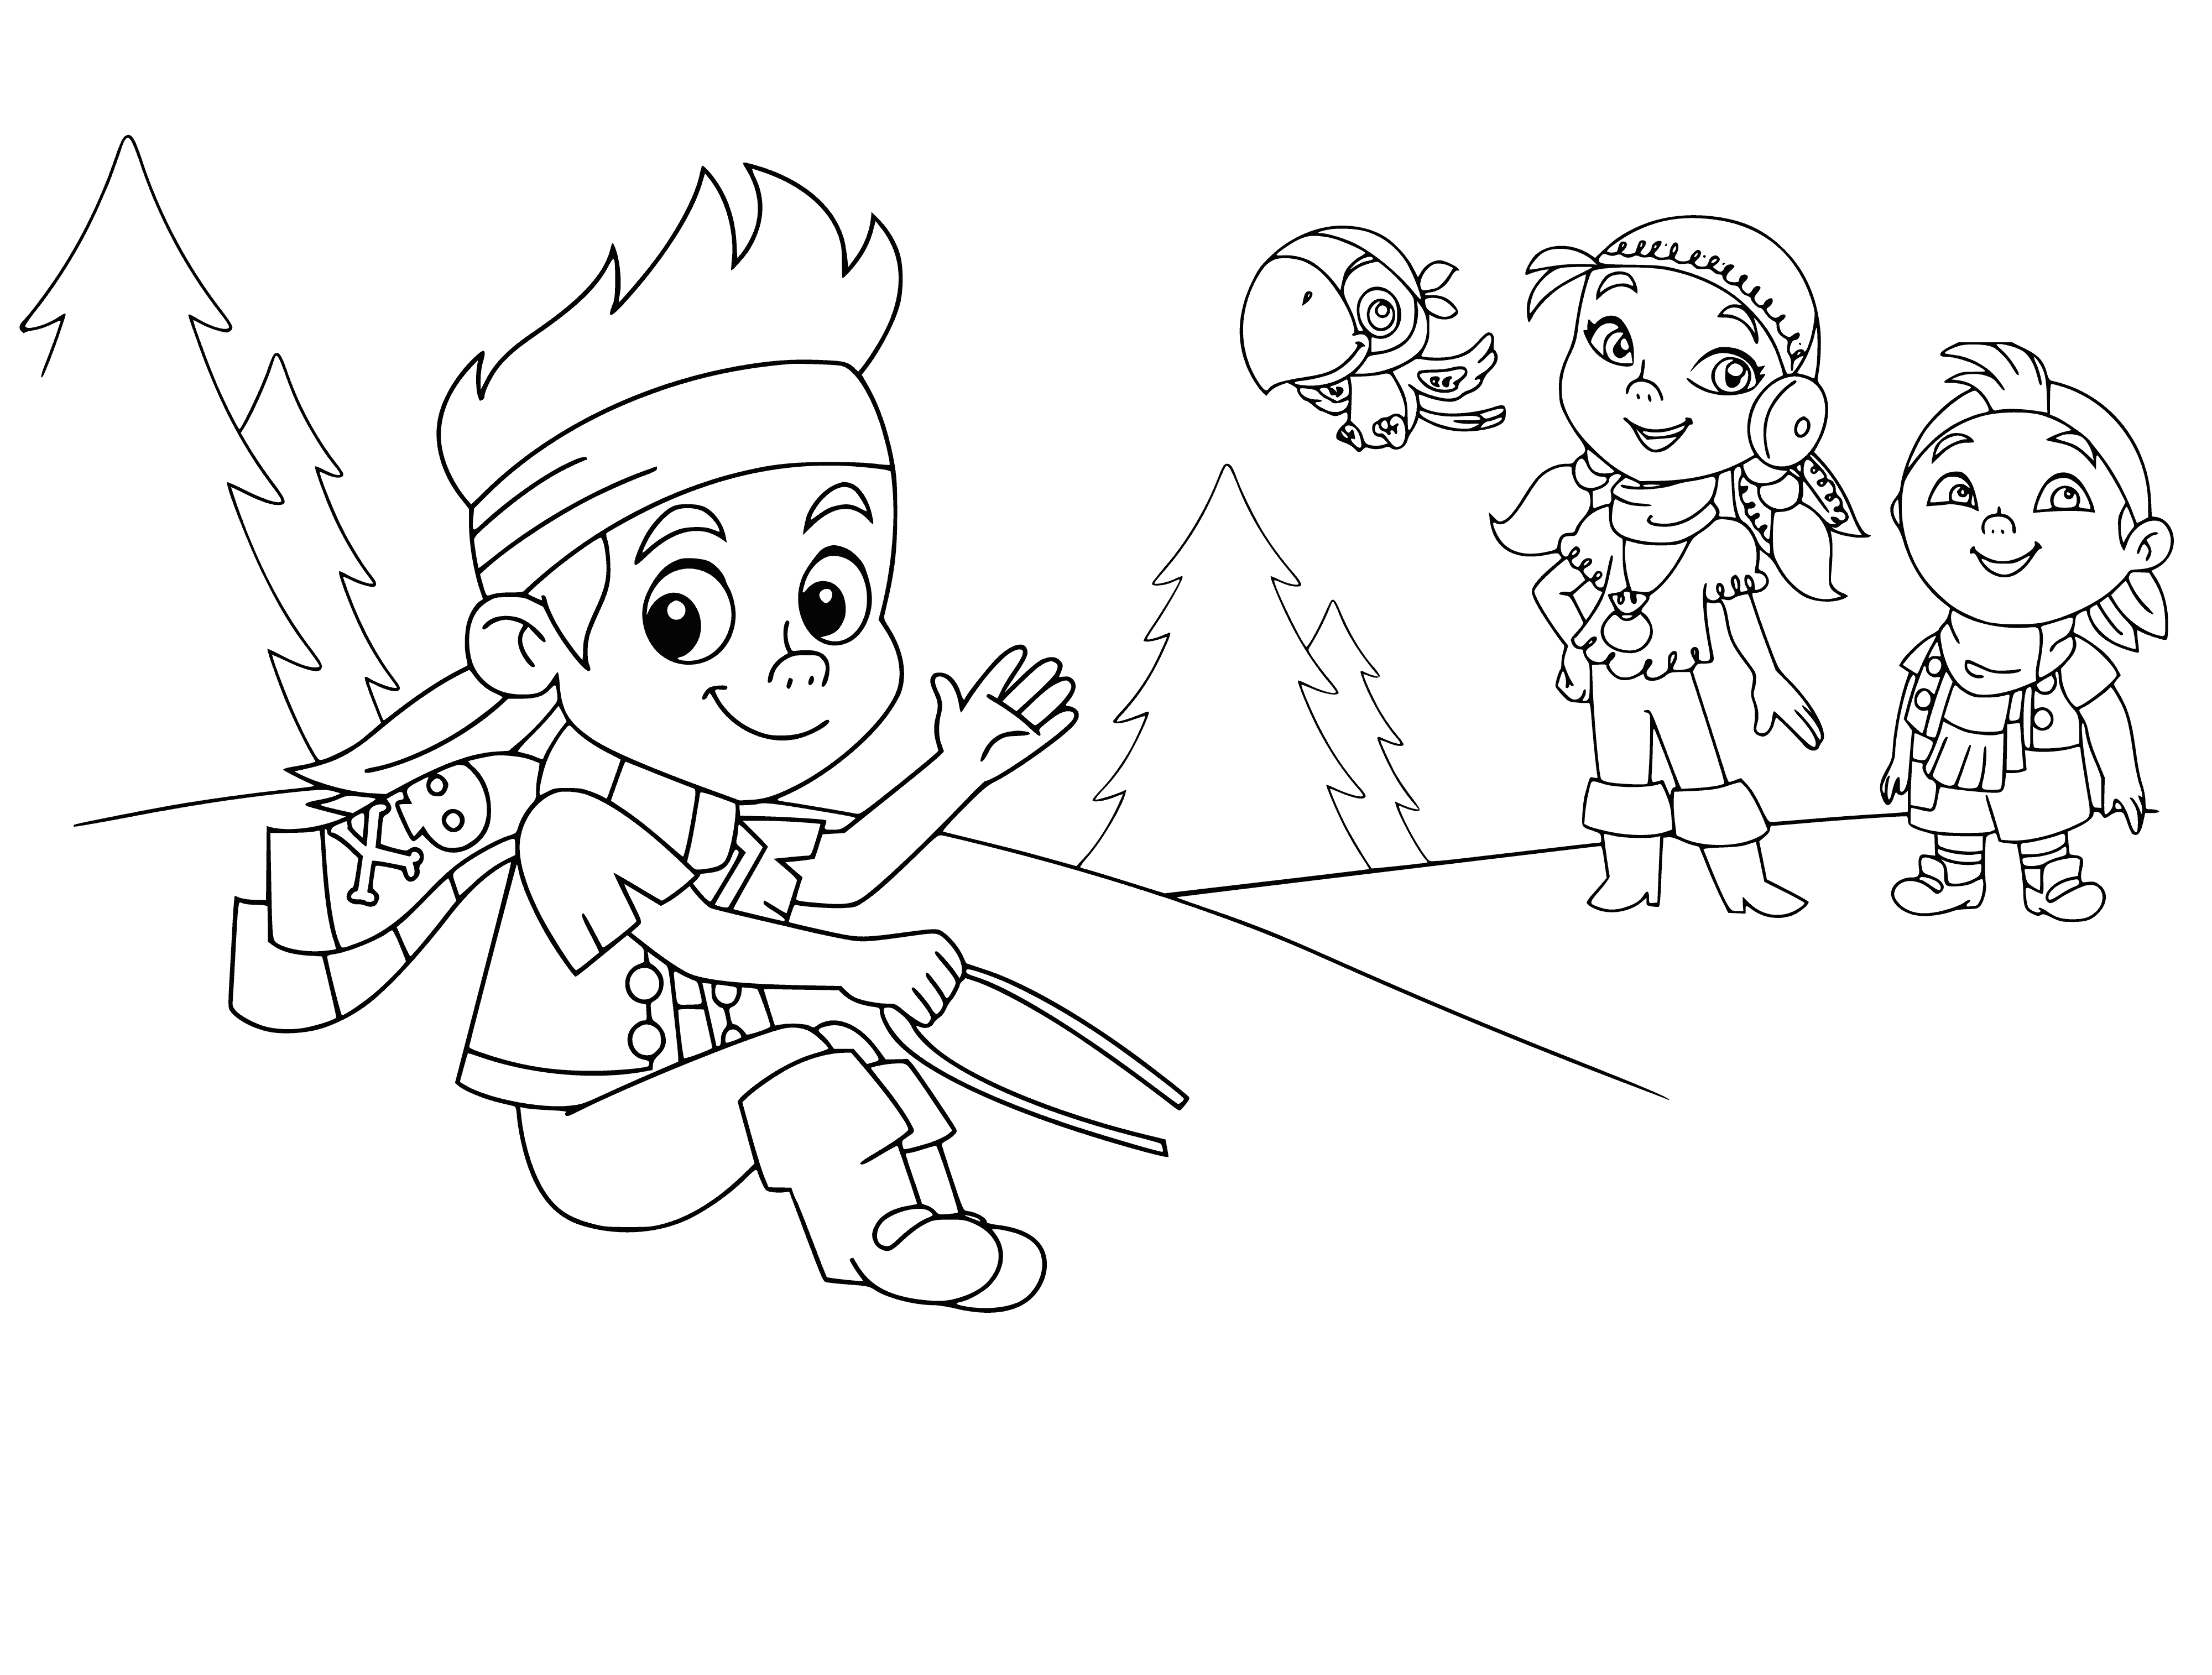 coloring page: The Never Land Pirates sled, smiles all around, flying snow as they zip down a hill. Fun!